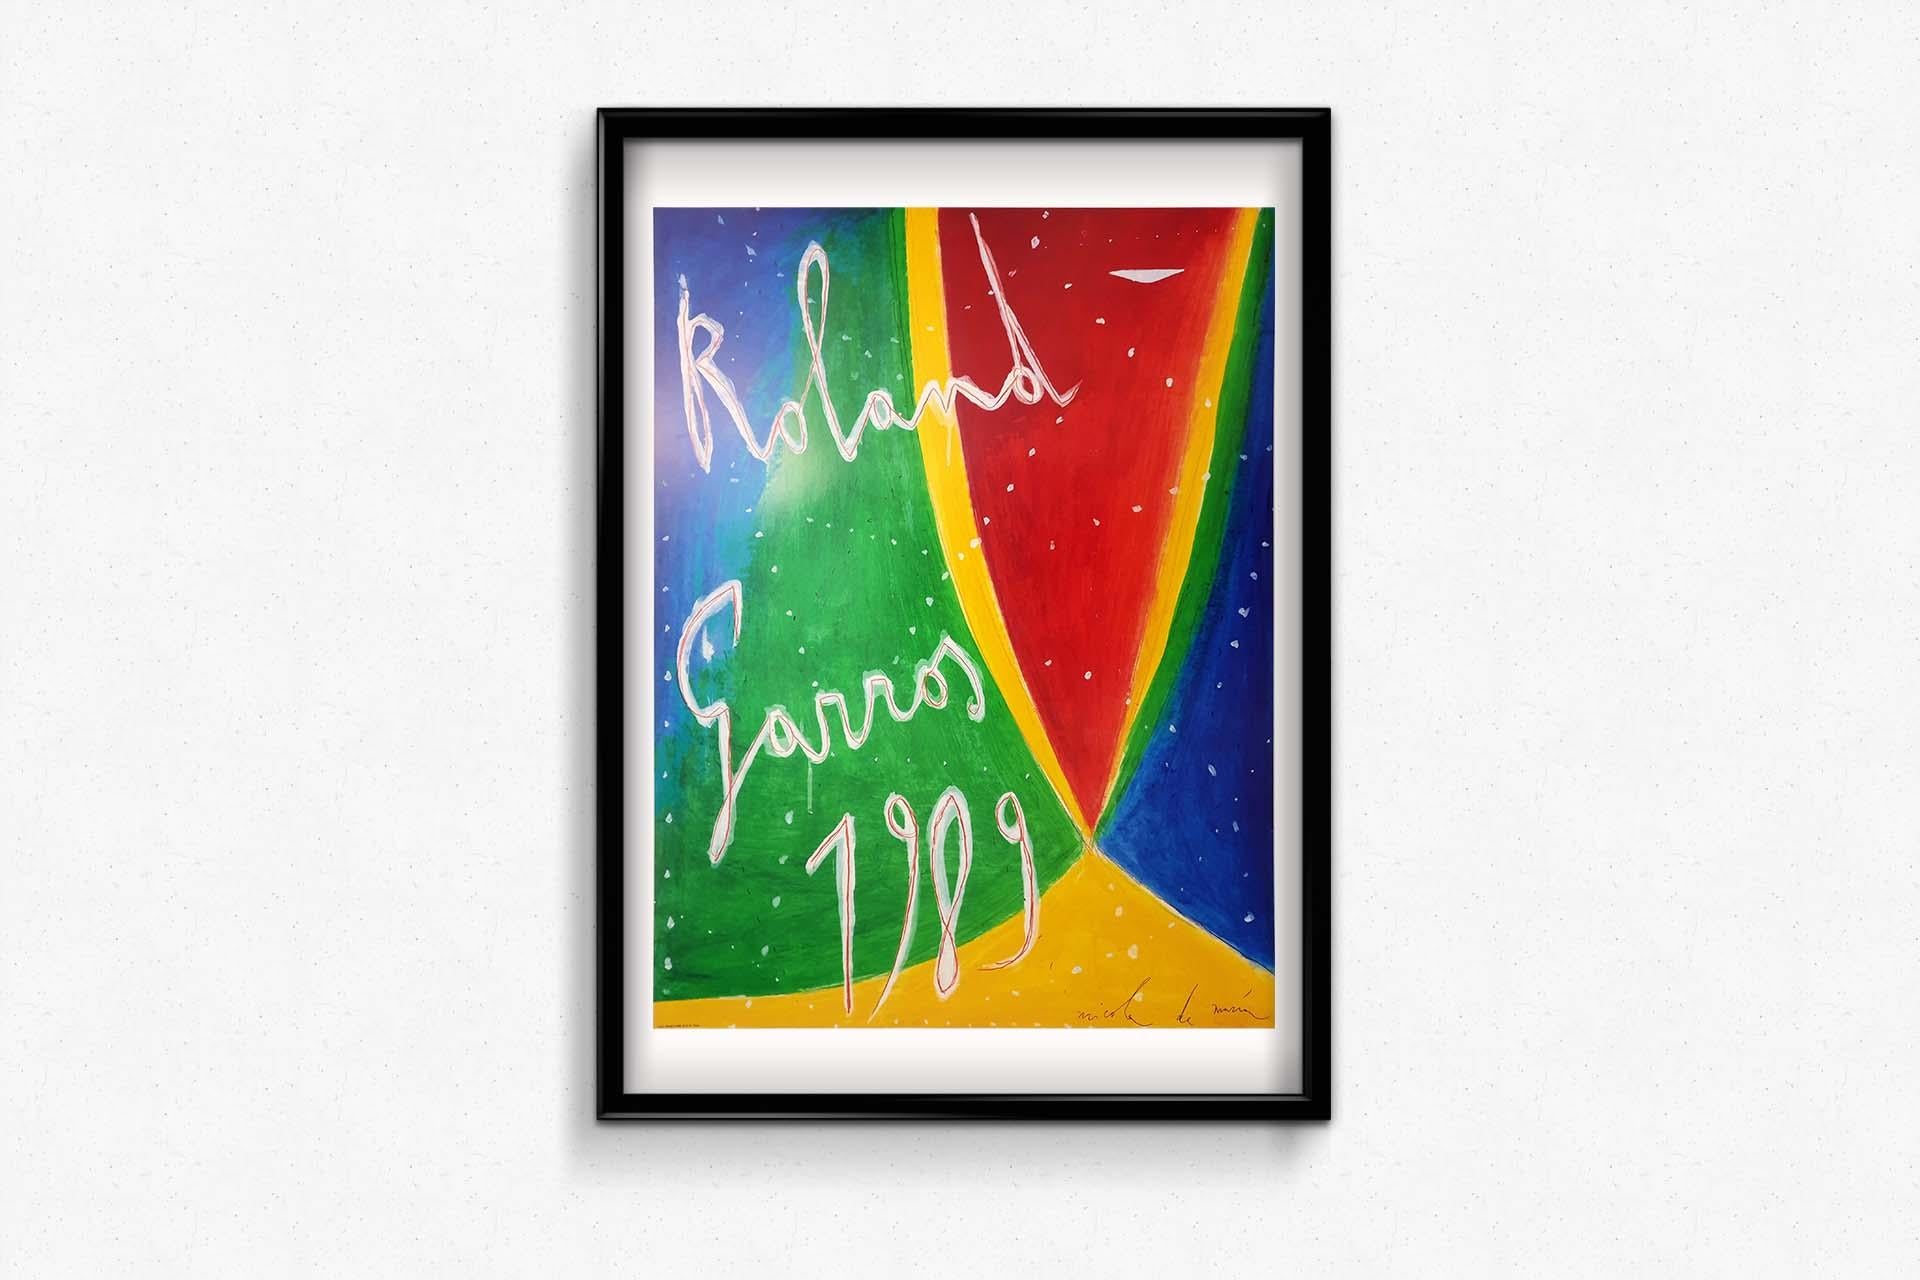 In the realm of sports advertising and poster art, Nicola de Maria's 1989 original poster for the Roland Garros Tennis Tournament stands as a masterpiece of vibrant creativity and artistic expression. This poster not only promotes a prestigious